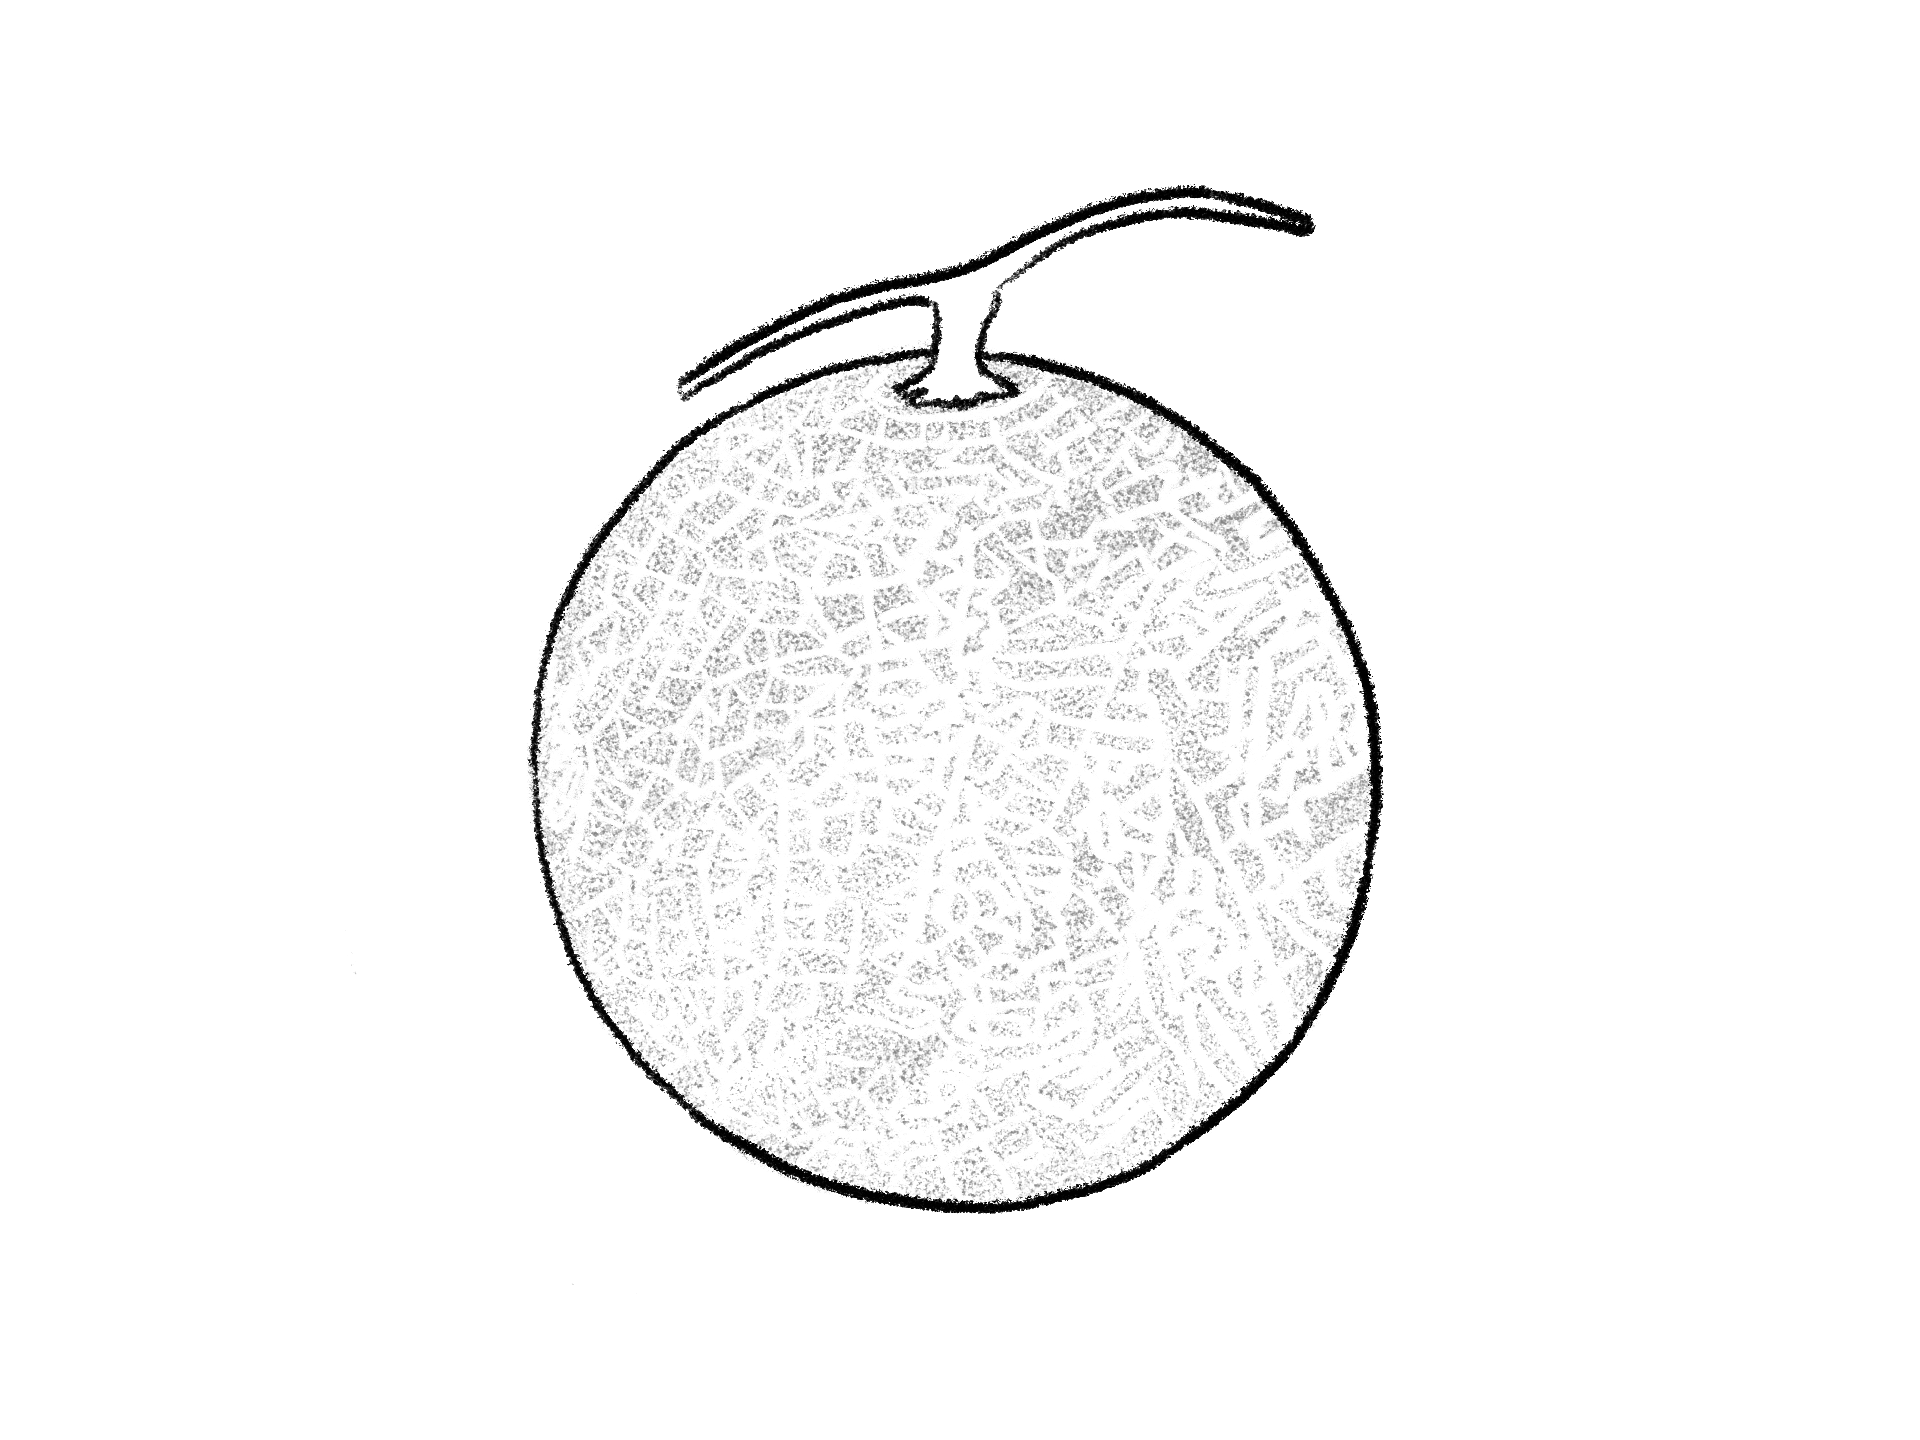 A melon, from The Melon Girl, a short story